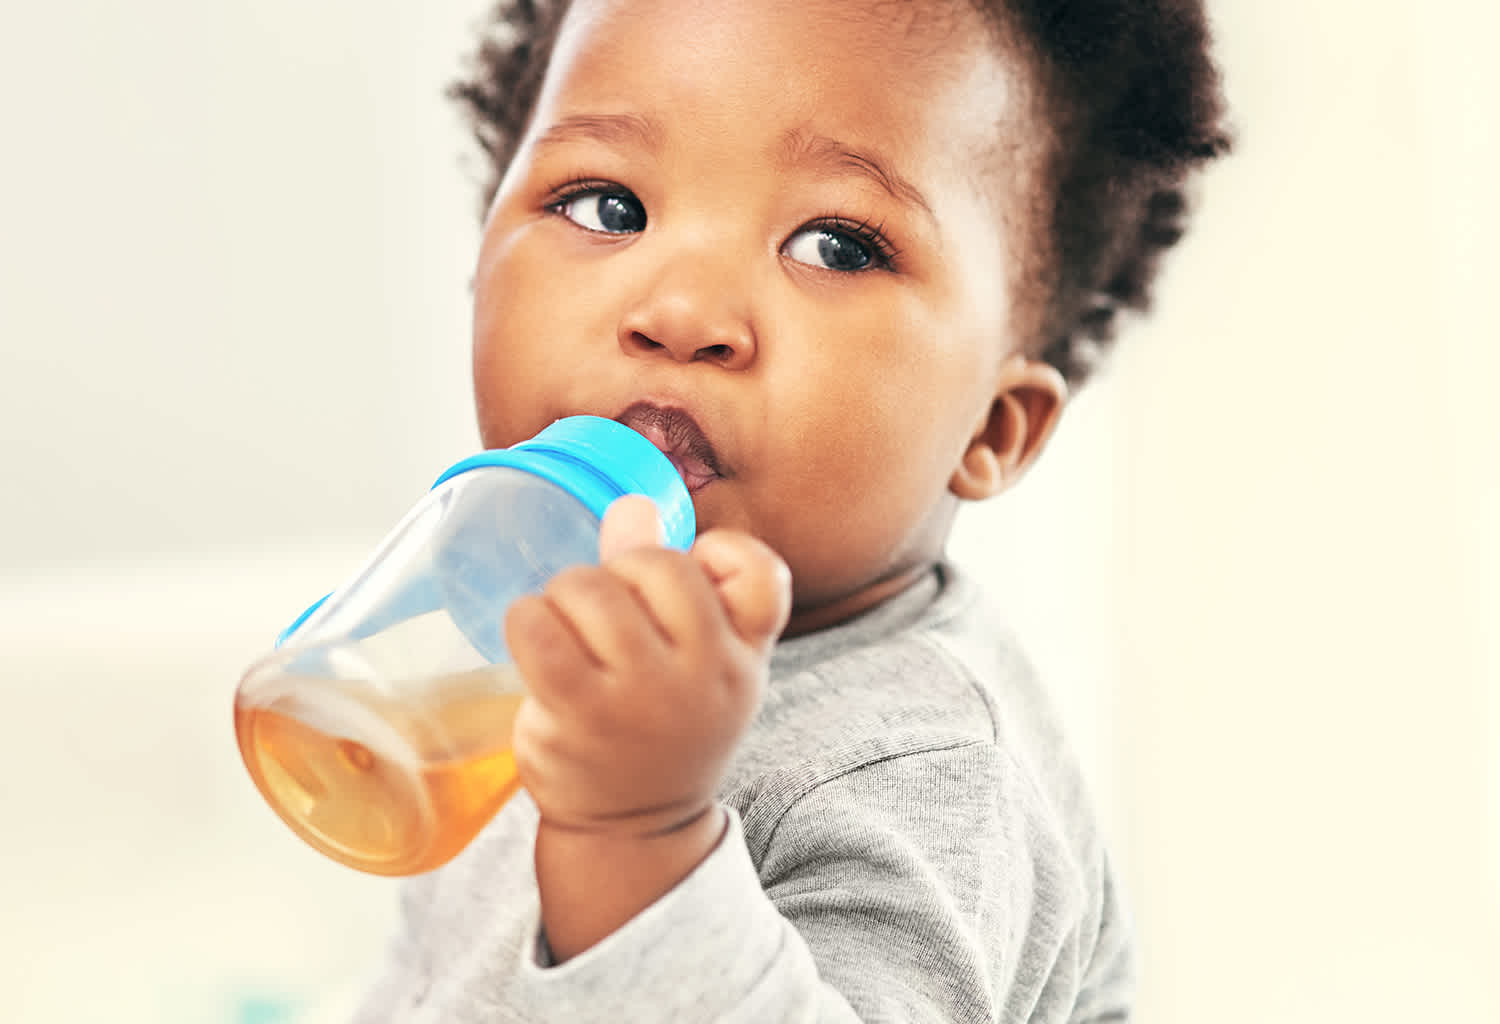 NUTRITION ED: How Much Milk Should My Child Drink? What Kind of